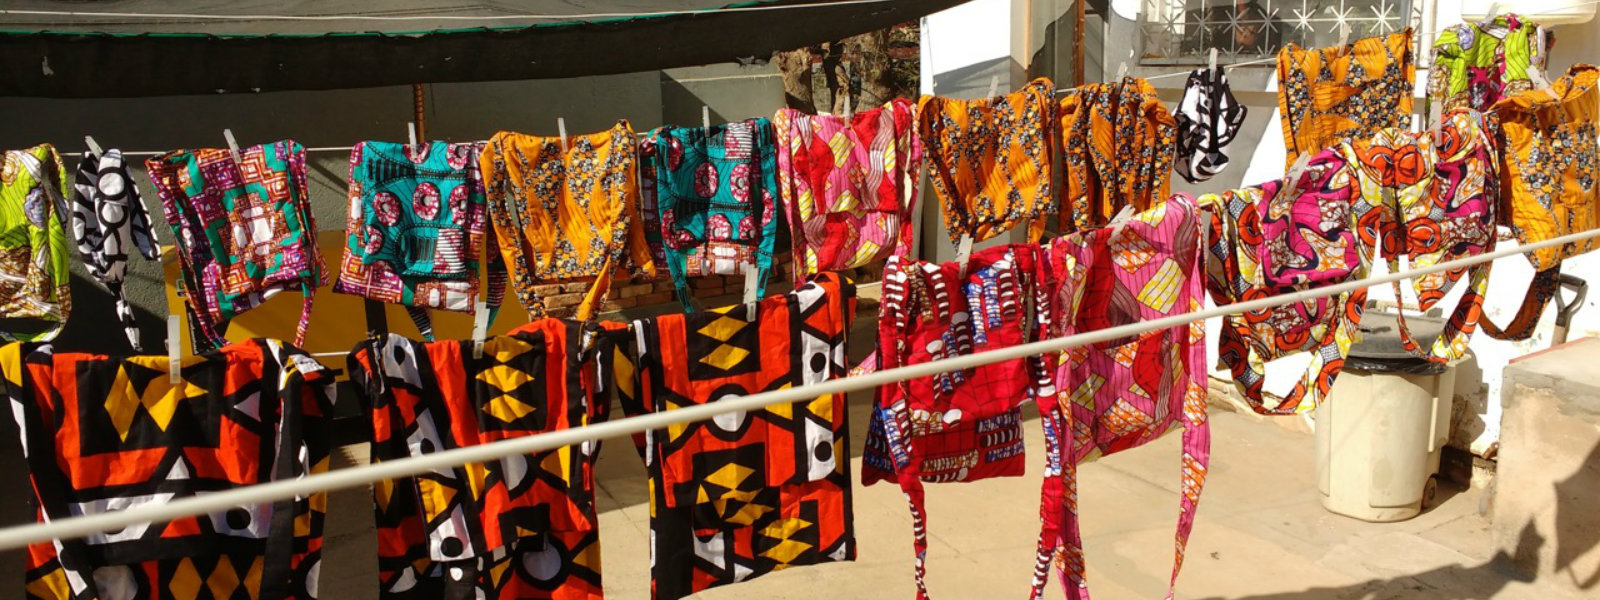 Clotheslines with colorful handmade bags, Hope for Our Sisters